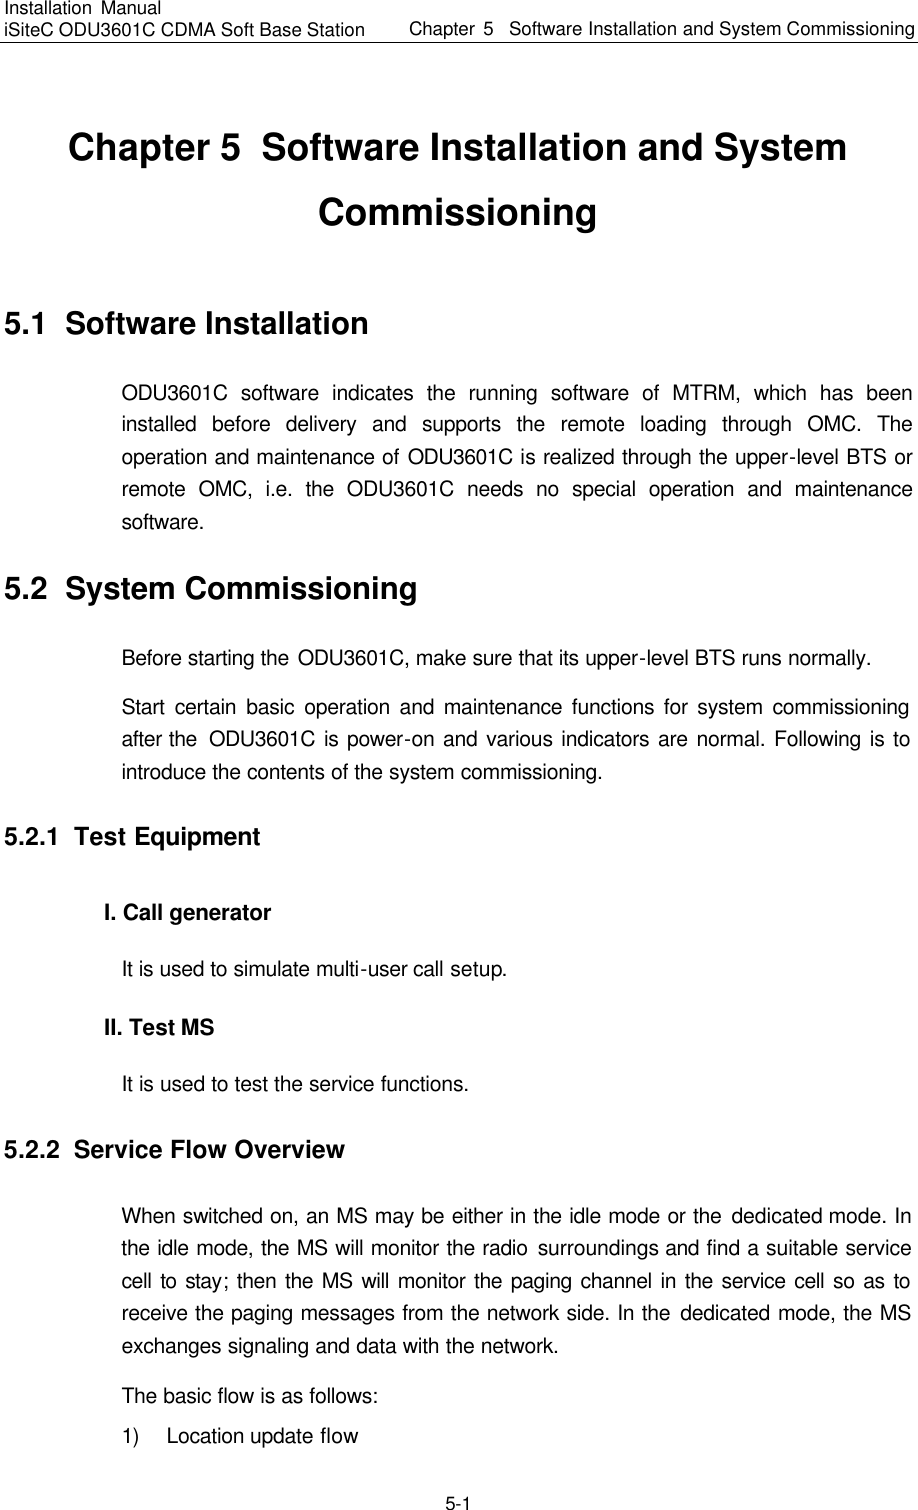 Installation Manual   iSiteC ODU3601C CDMA Soft Base Station Chapter 5  Software Installation and System Commissioning  5-1 Chapter 5  Software Installation and System Commissioning 5.1  Software Installation ODU3601C software indicates the running software of MTRM, which has been installed before delivery and supports the remote loading through OMC. The operation and maintenance of ODU3601C is realized through the upper-level BTS or remote OMC, i.e. the ODU3601C needs no special operation and maintenance software. 5.2  System Commissioning Before starting the ODU3601C, make sure that its upper-level BTS runs normally.   Start certain basic operation and maintenance functions for system commissioning after the  ODU3601C is power-on and various indicators are normal. Following is to introduce the contents of the system commissioning. 5.2.1  Test Equipment 　I. Call generator It is used to simulate multi-user call setup.   II. Test MS 　It is used to test the service functions.   5.2.2  Service Flow Overview When switched on, an MS may be either in the idle mode or the dedicated mode. In the idle mode, the MS will monitor the radio surroundings and find a suitable service cell  to stay; then the MS will monitor the paging channel in the service cell so as to receive the paging messages from the network side. In the dedicated mode, the MS exchanges signaling and data with the network.   The basic flow is as follows:   1) Location update flow 